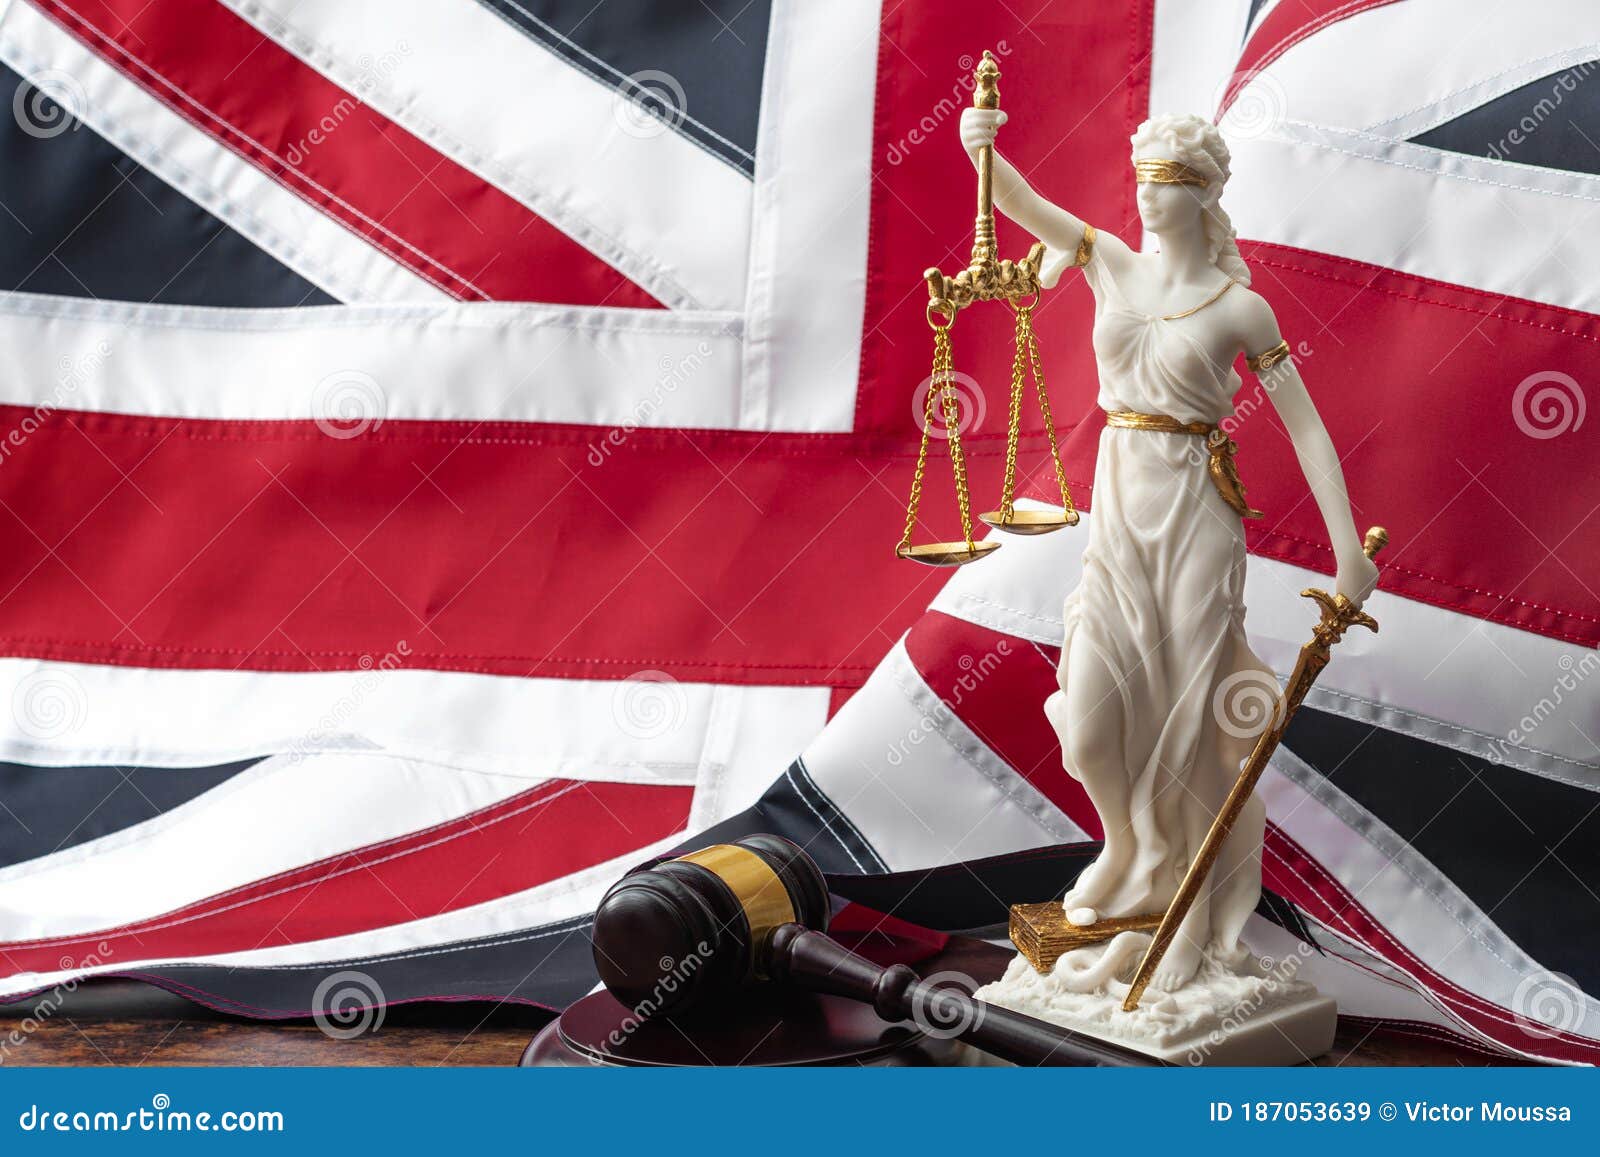 social contract and the rule of law in the united kingdom of great britain concept theme with statue of goddess justitia, wooden